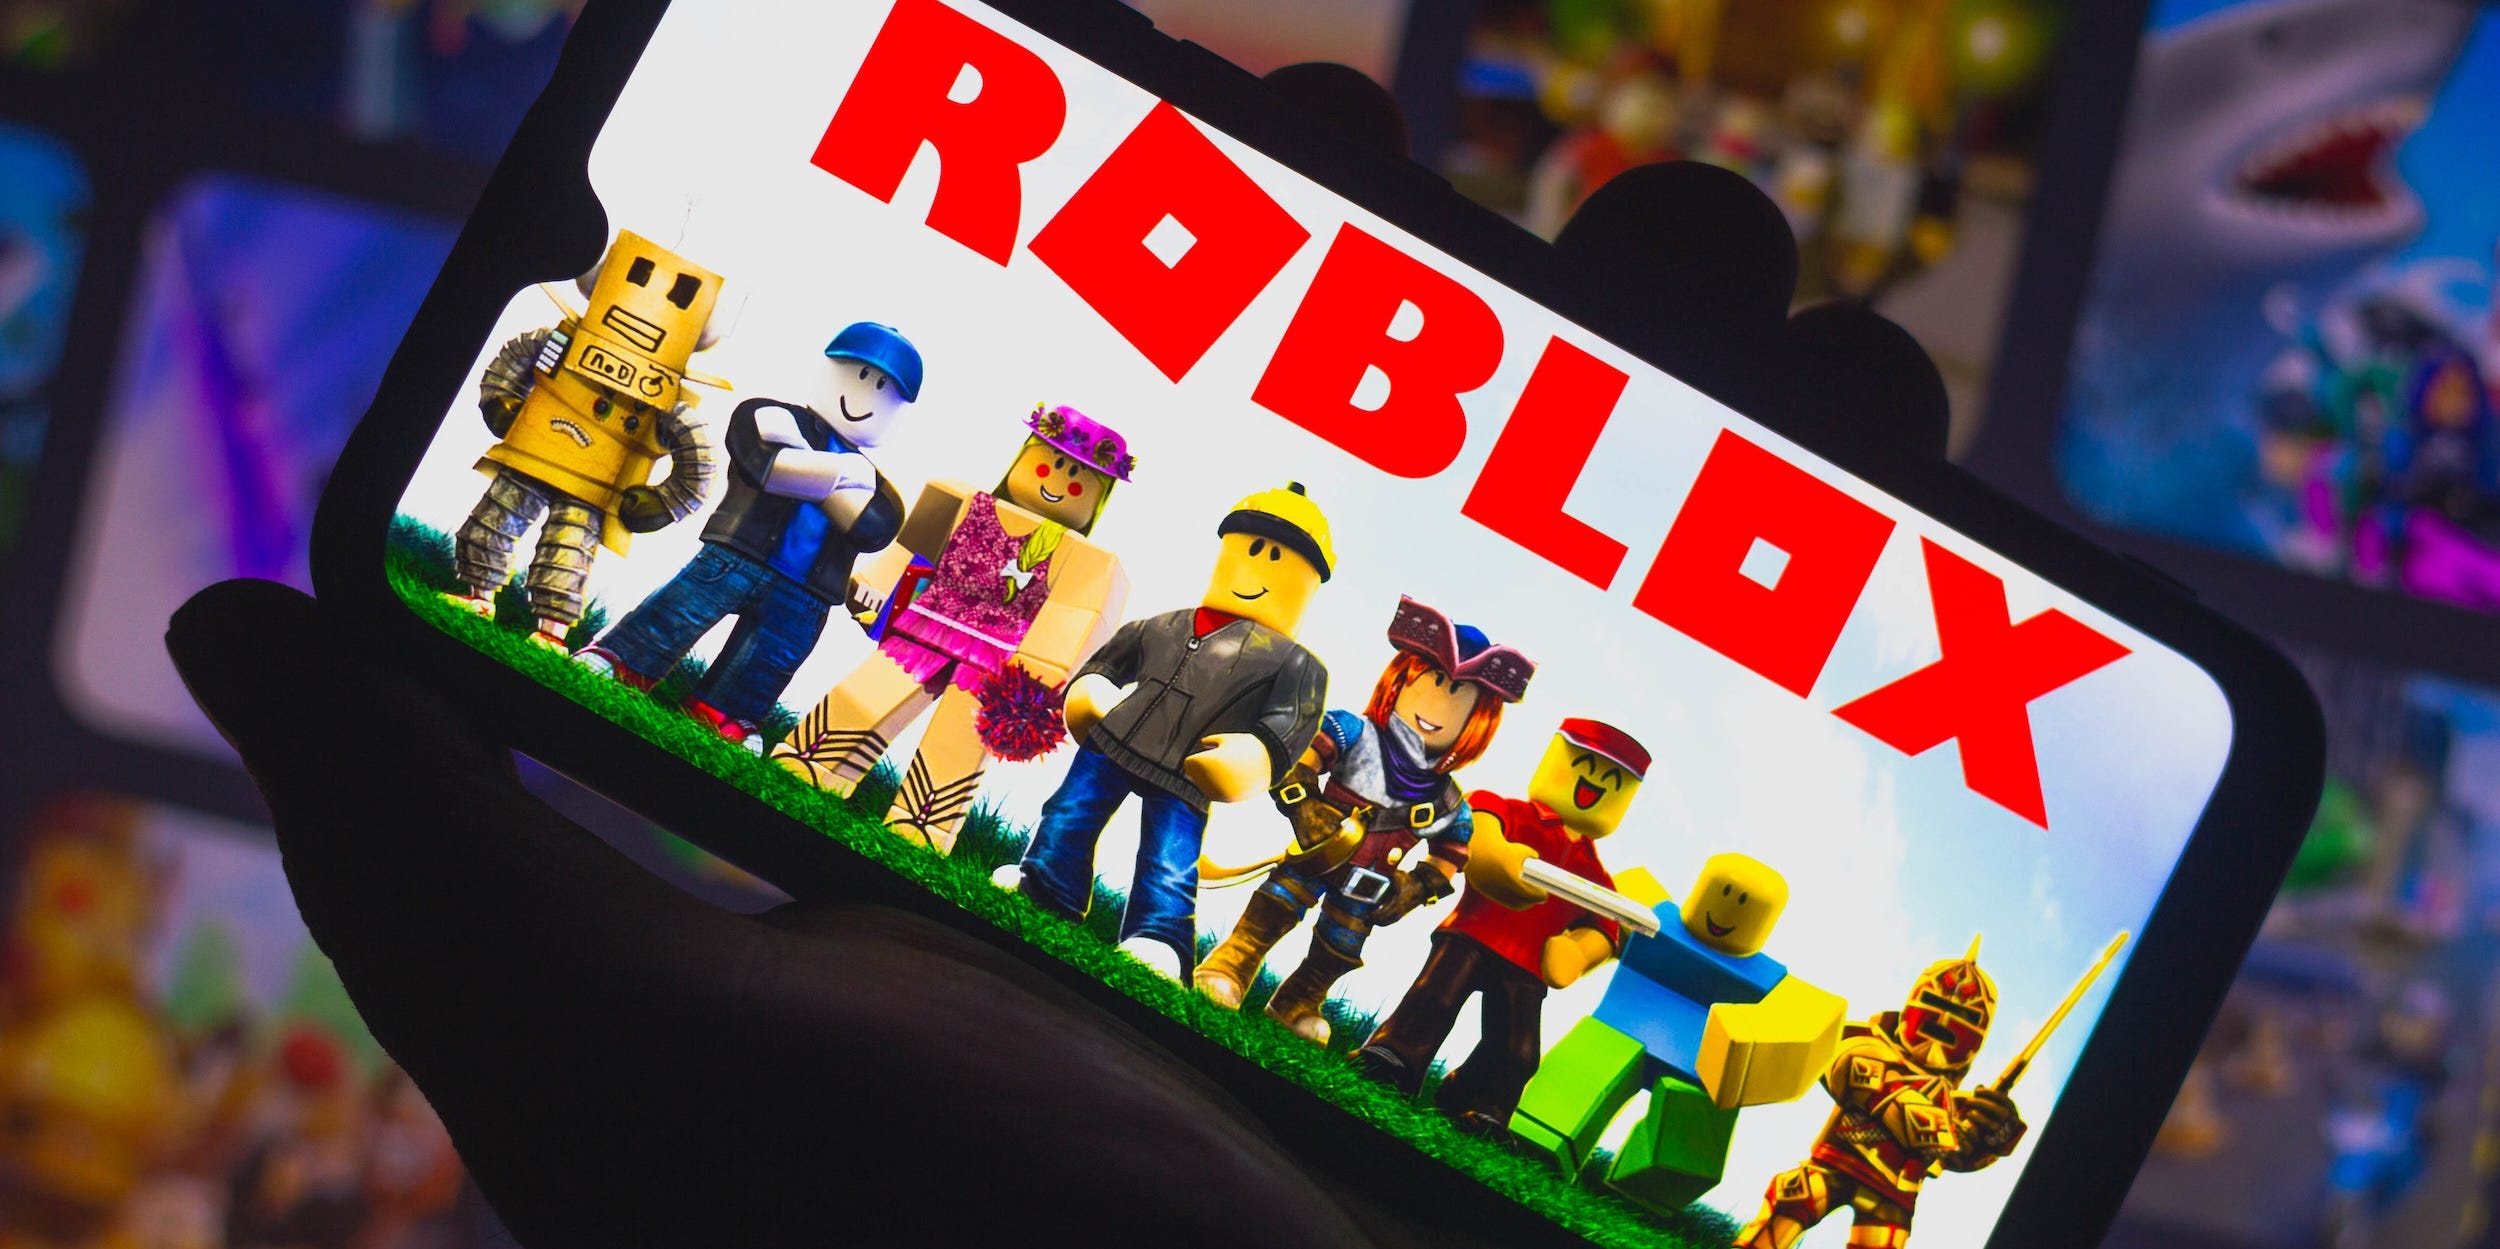 How to redeem a Roblox gift card in 2 different ways, so you can buy  in-game accessories and upgrades